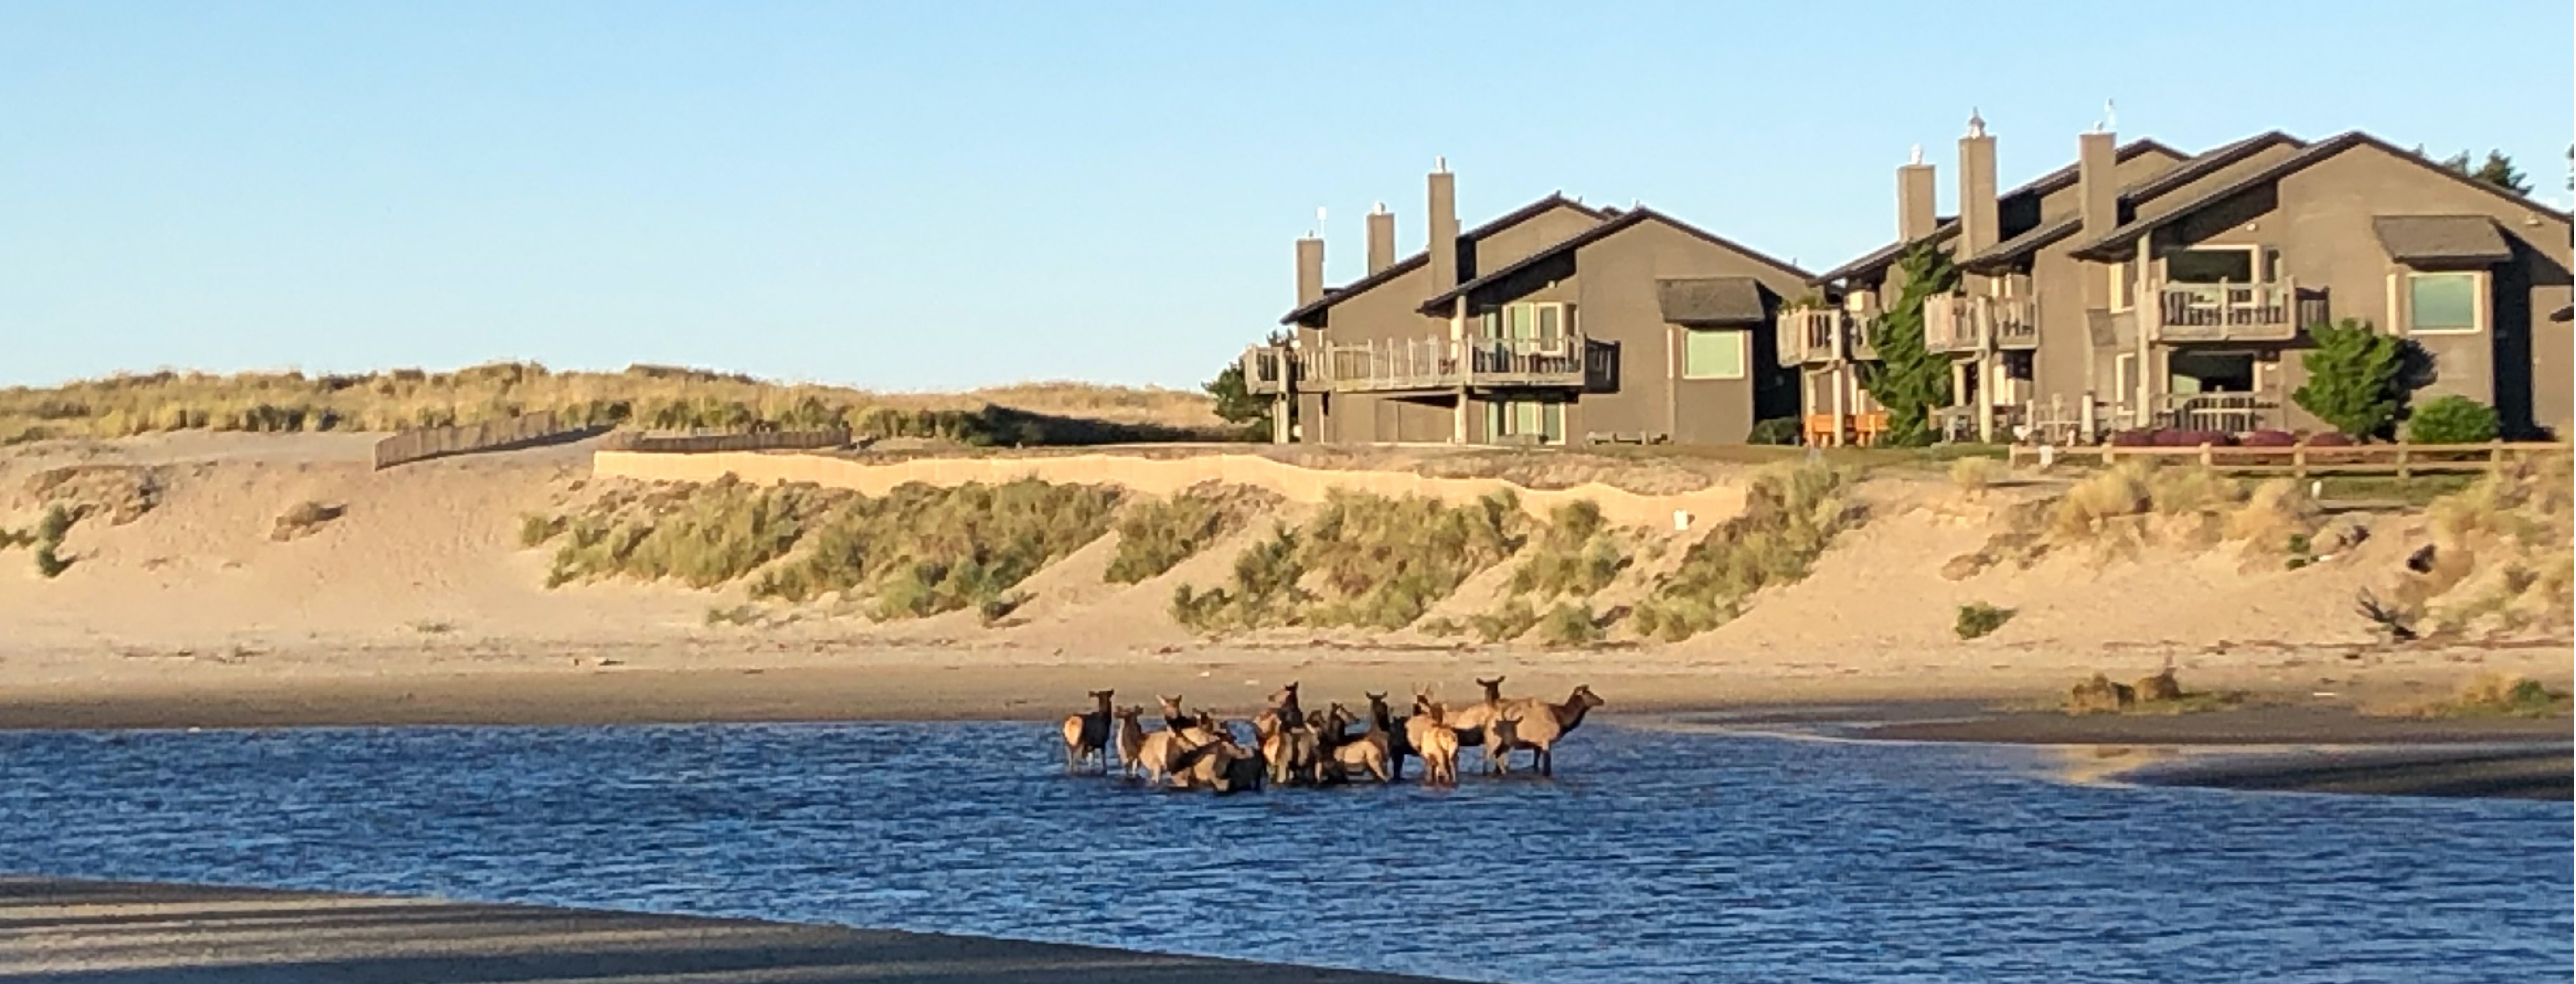 a herd of elk ford Ecola Creek in front of the dune and Breakers Point Condominiums